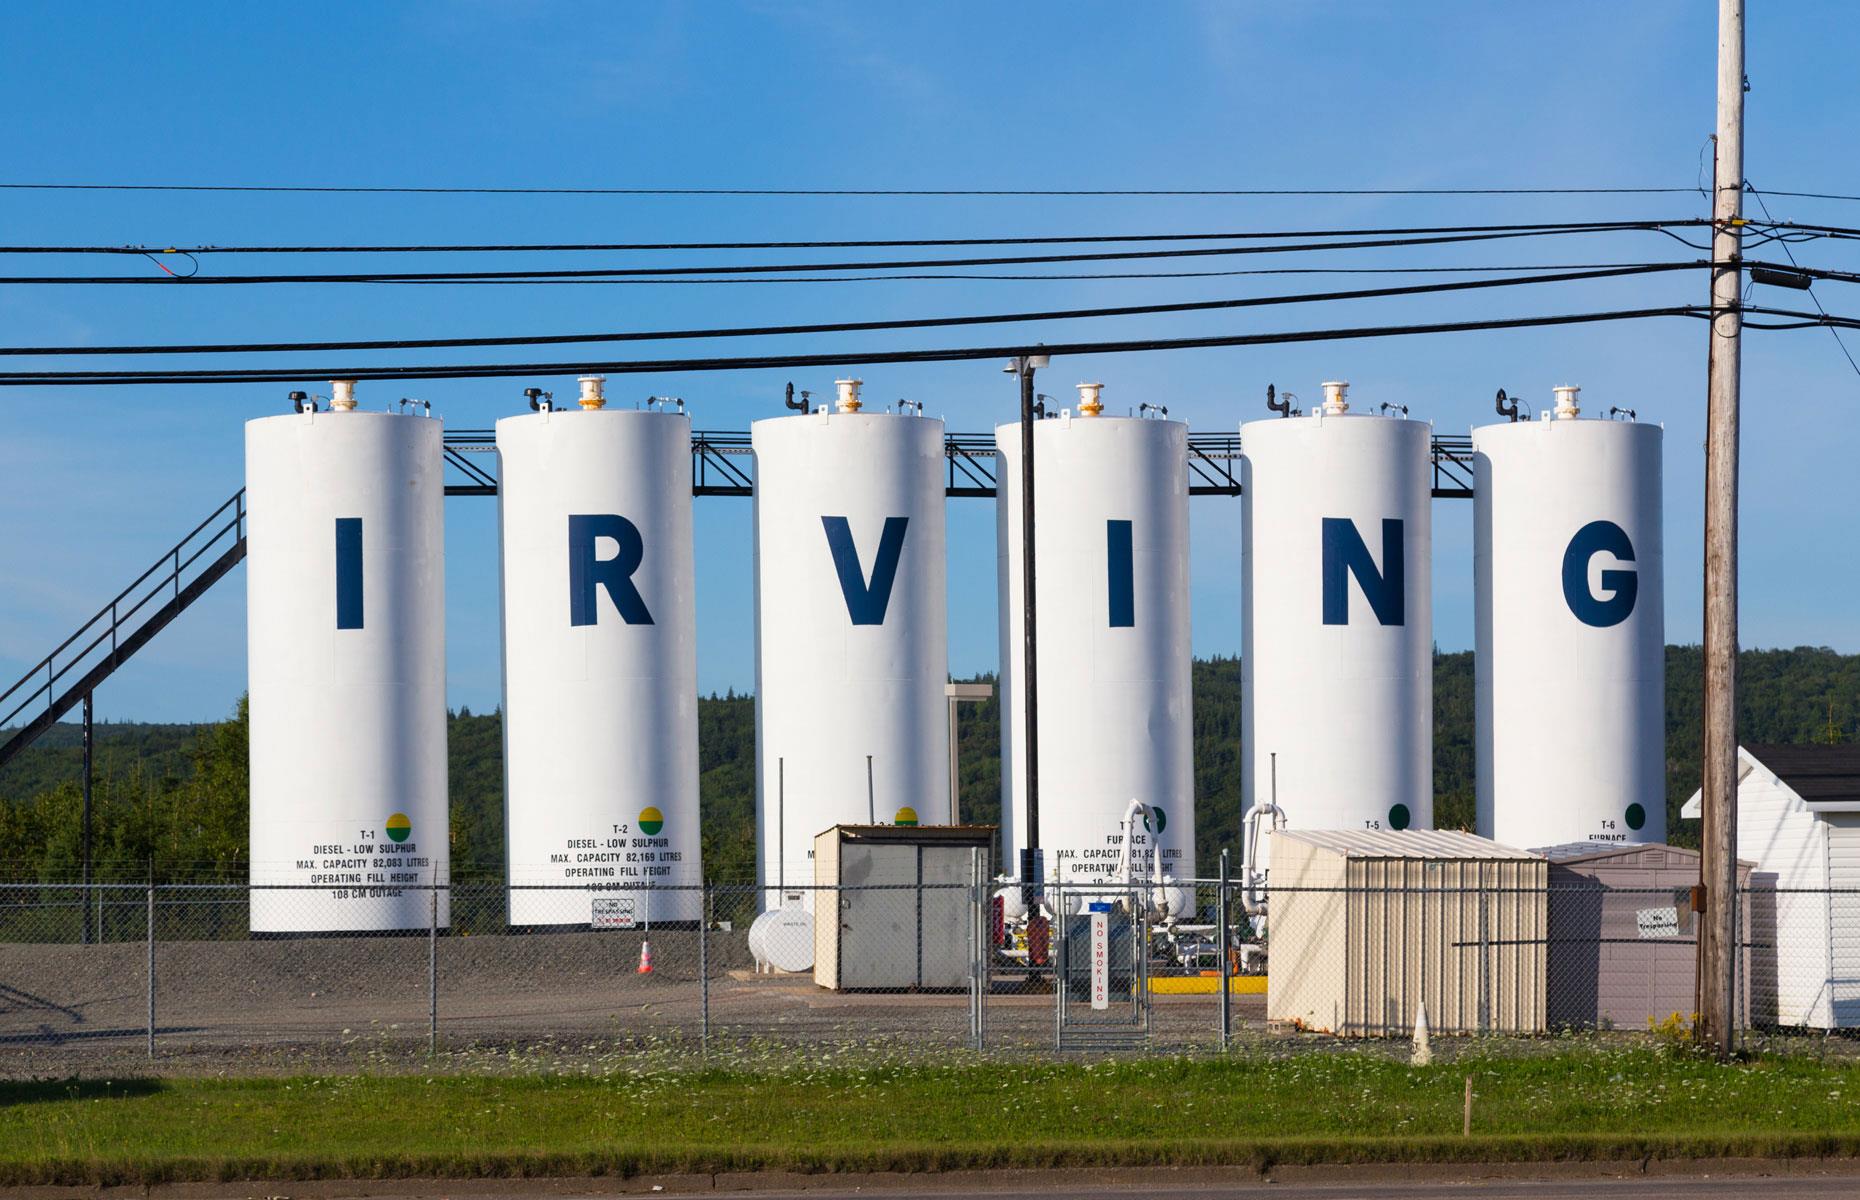 Joint 30. Irving family: 1.3 million hectares